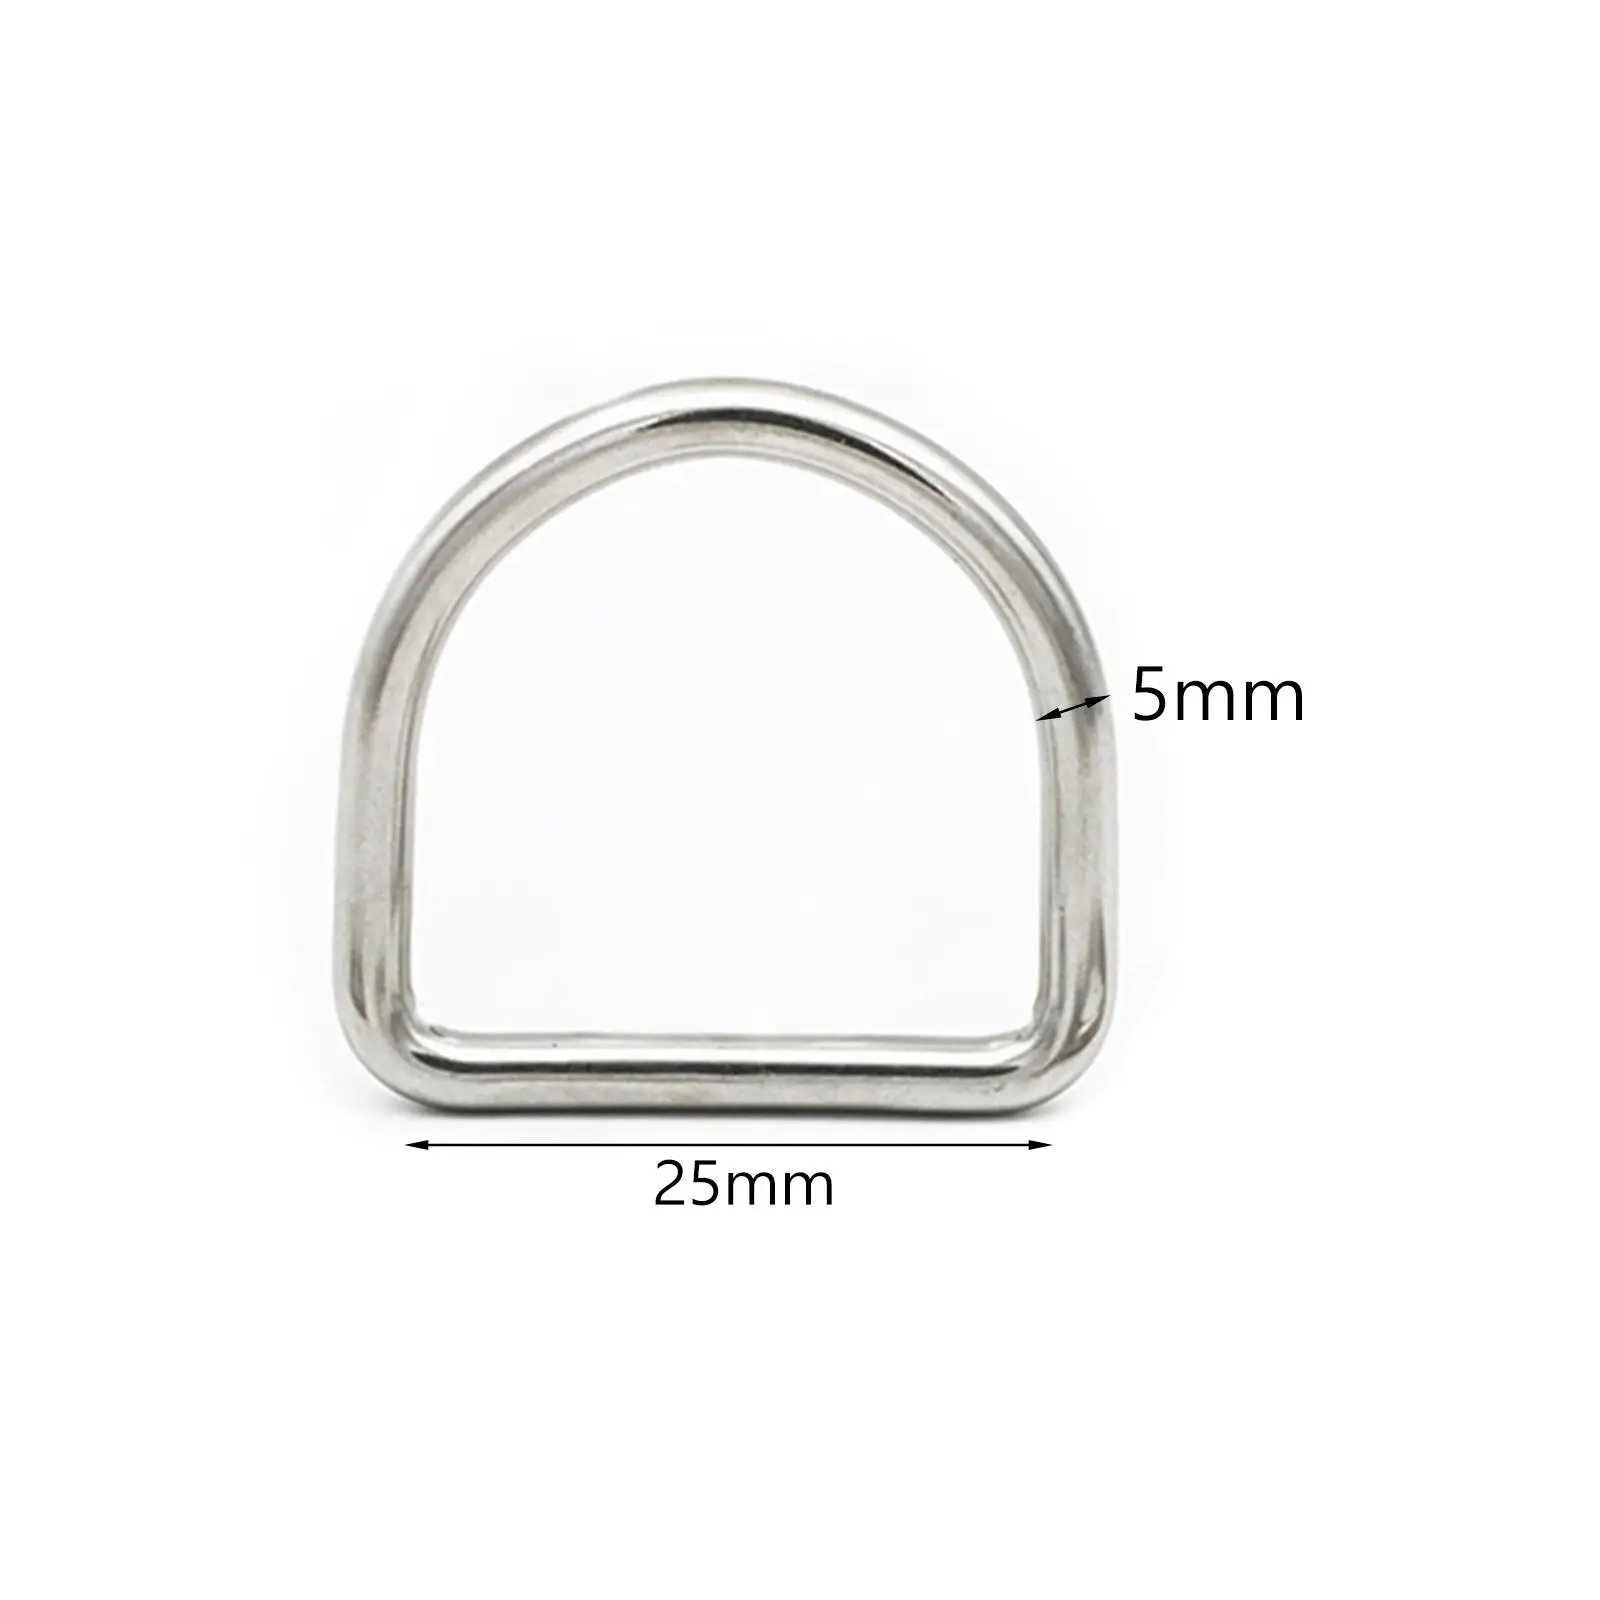 Horseshoe Shape Buckles Hardware Accessories Lightweight Stainless Steel D Rings